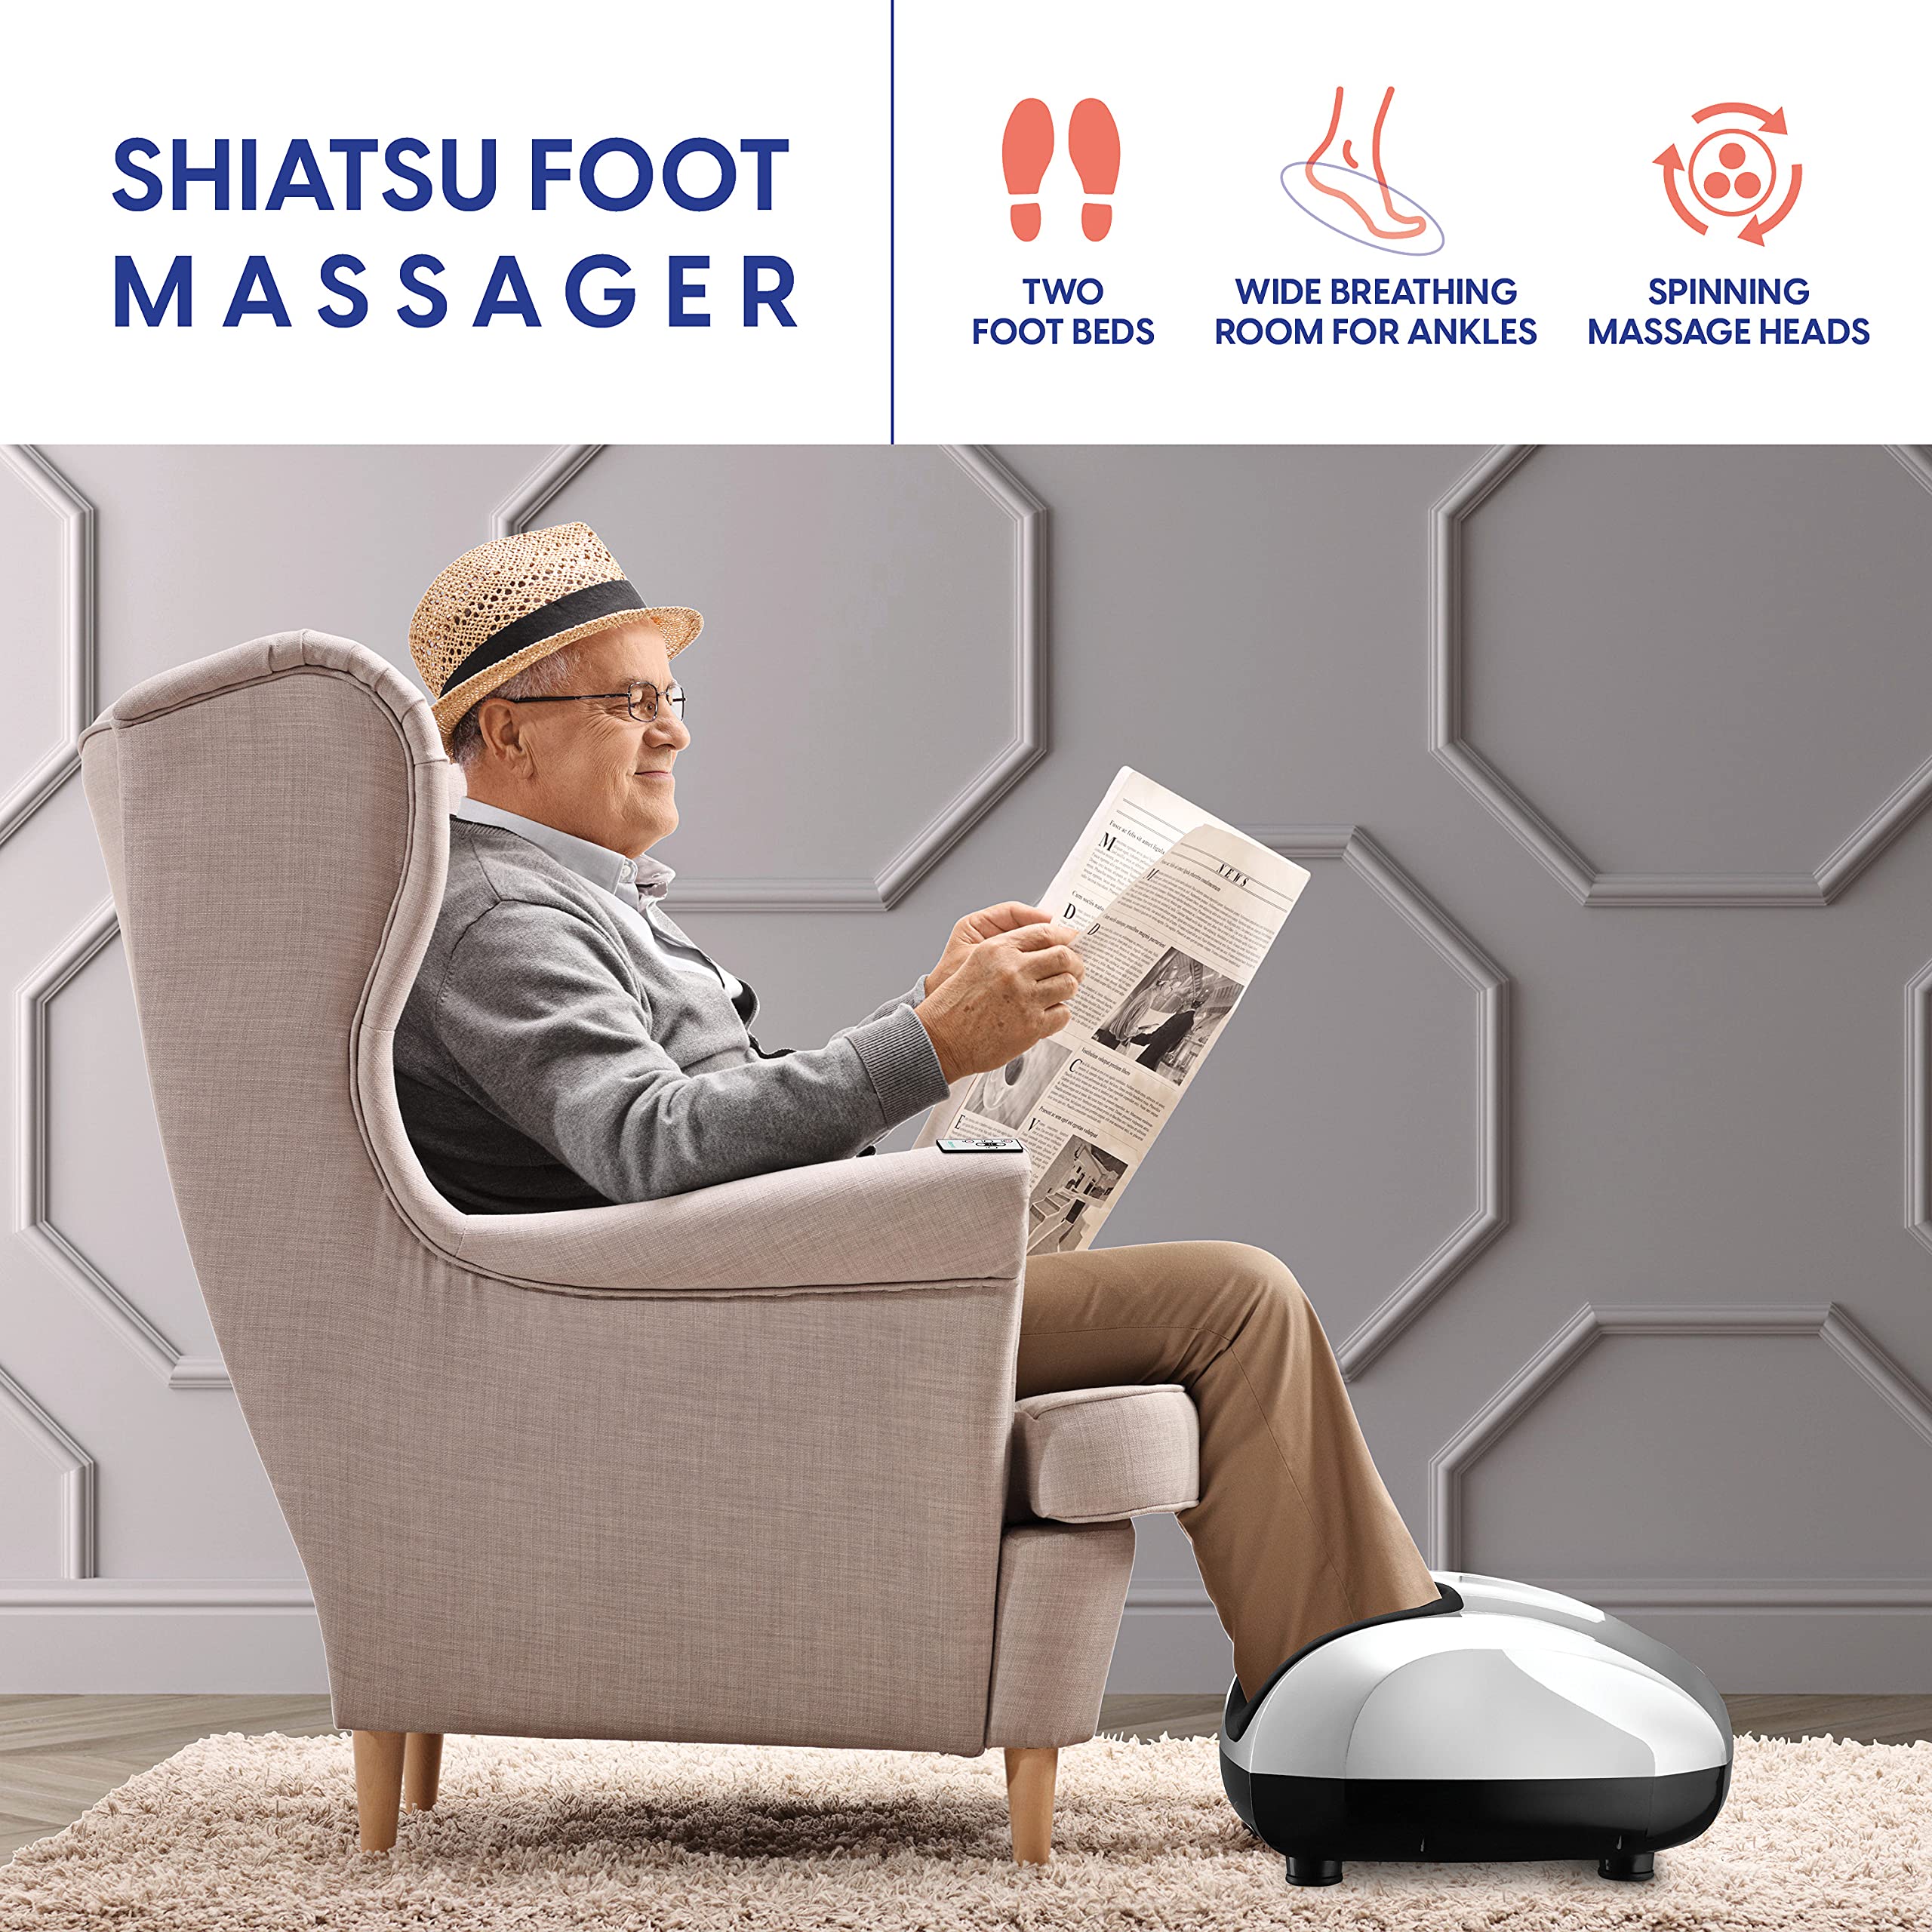 Belmint Shiatsu Foot Massager Machine - Electric Deep-Kneading Foot and Heel Pain Relief Massage with Switchable Heat, Air Compression for Plantar Fasciitis and Neuropathy with Non-Slip Rubber Feet  - Very Good